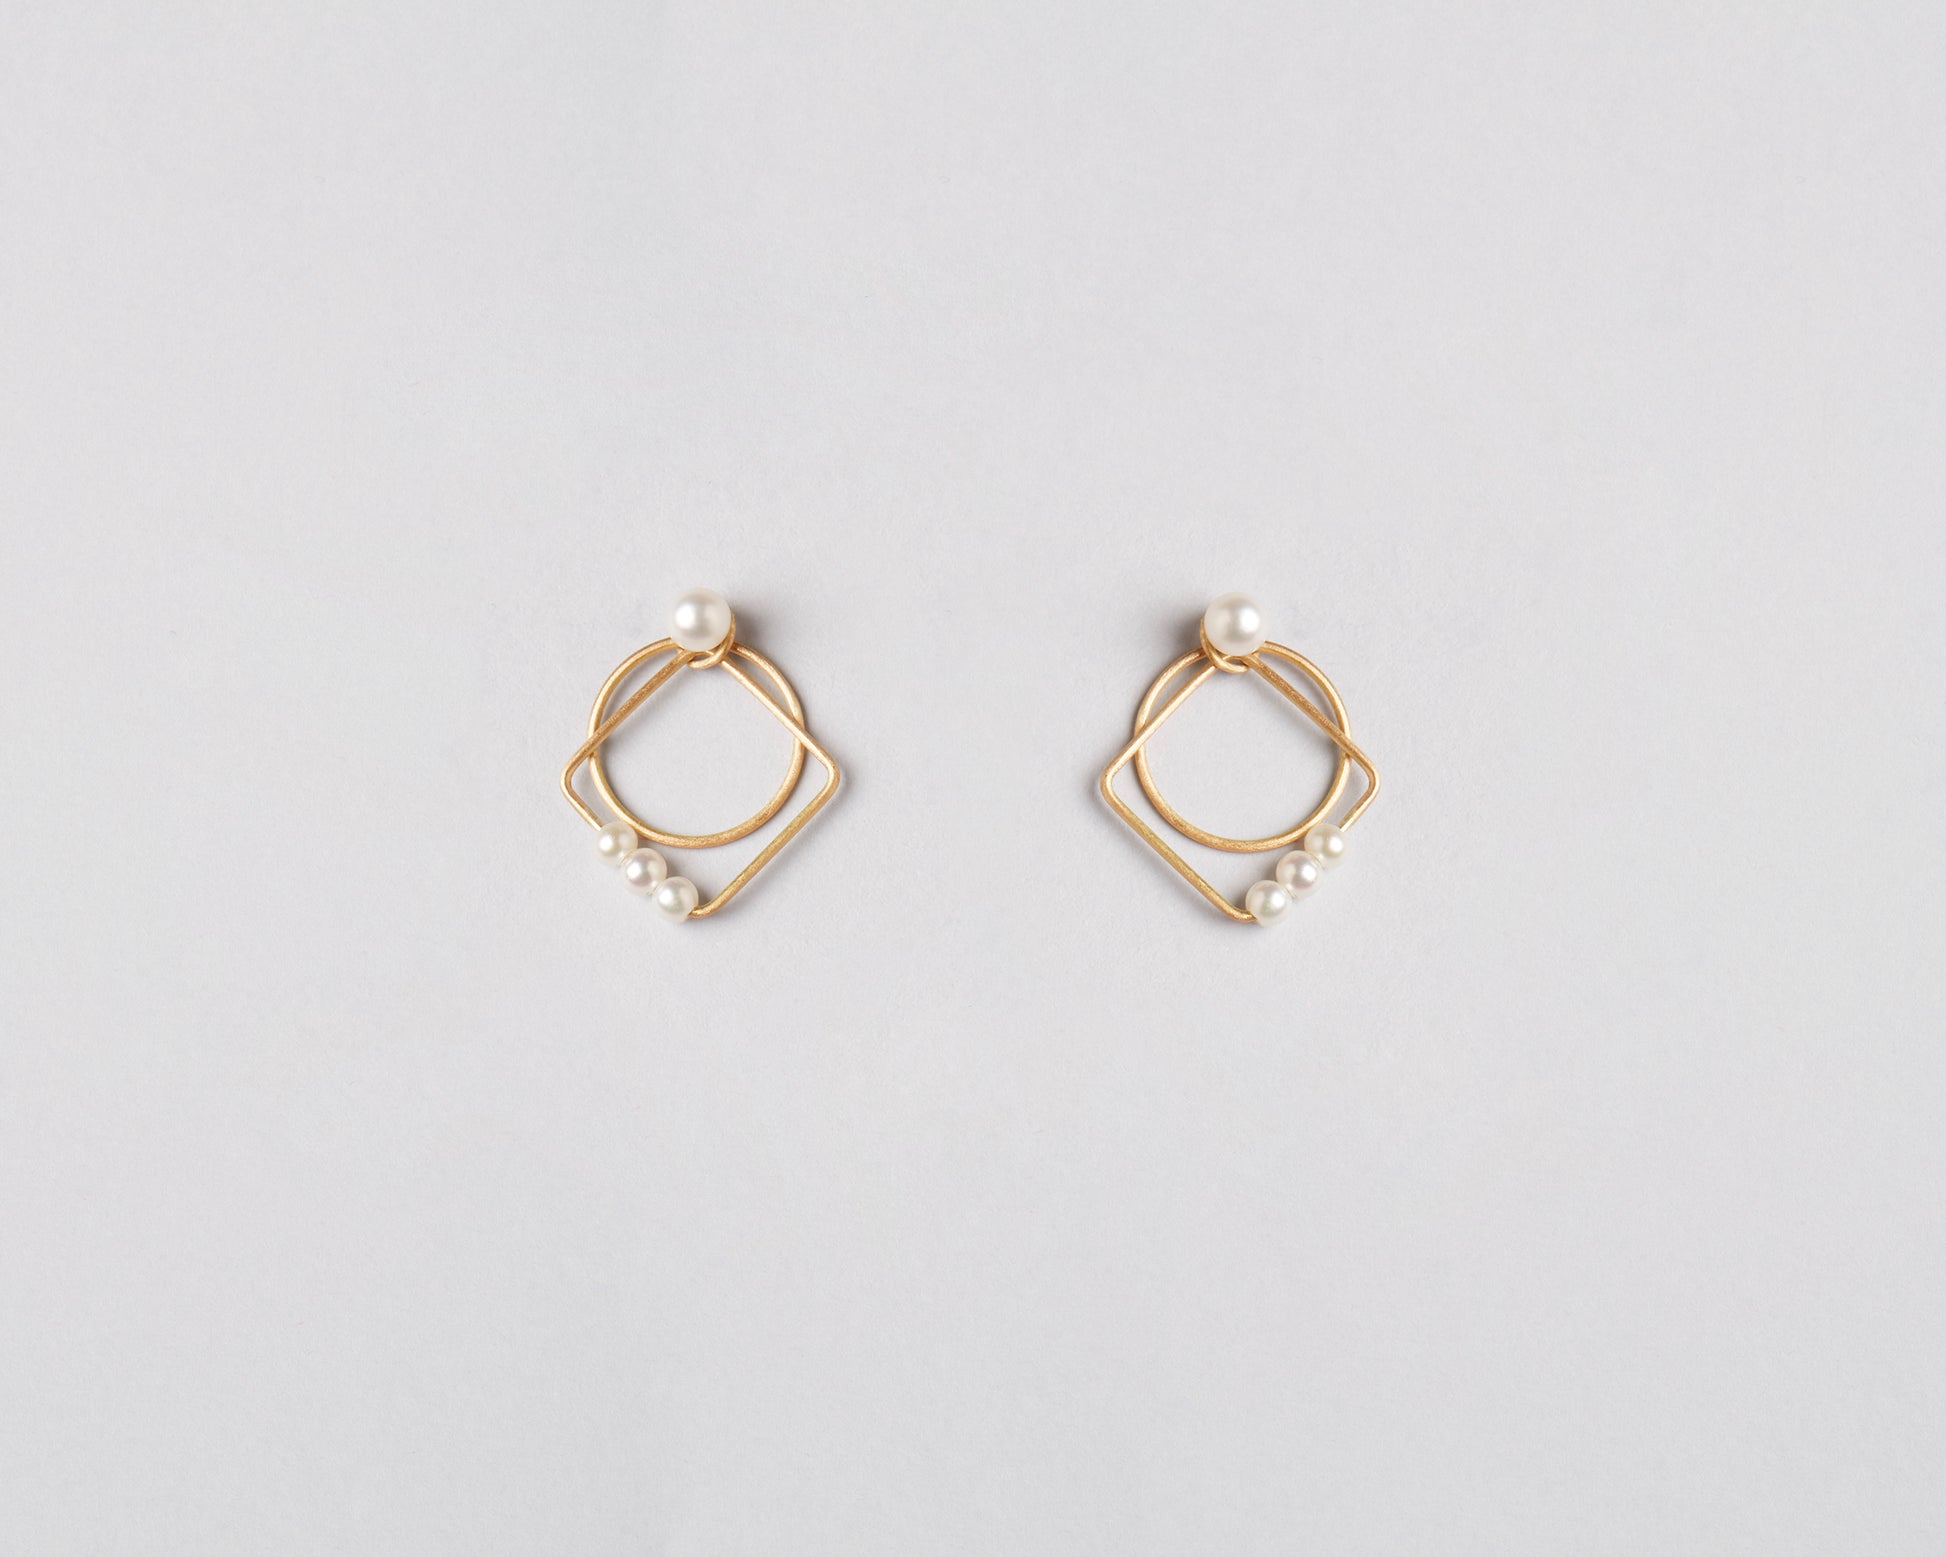 18KT gold earrings with freshwater pearls - All together E